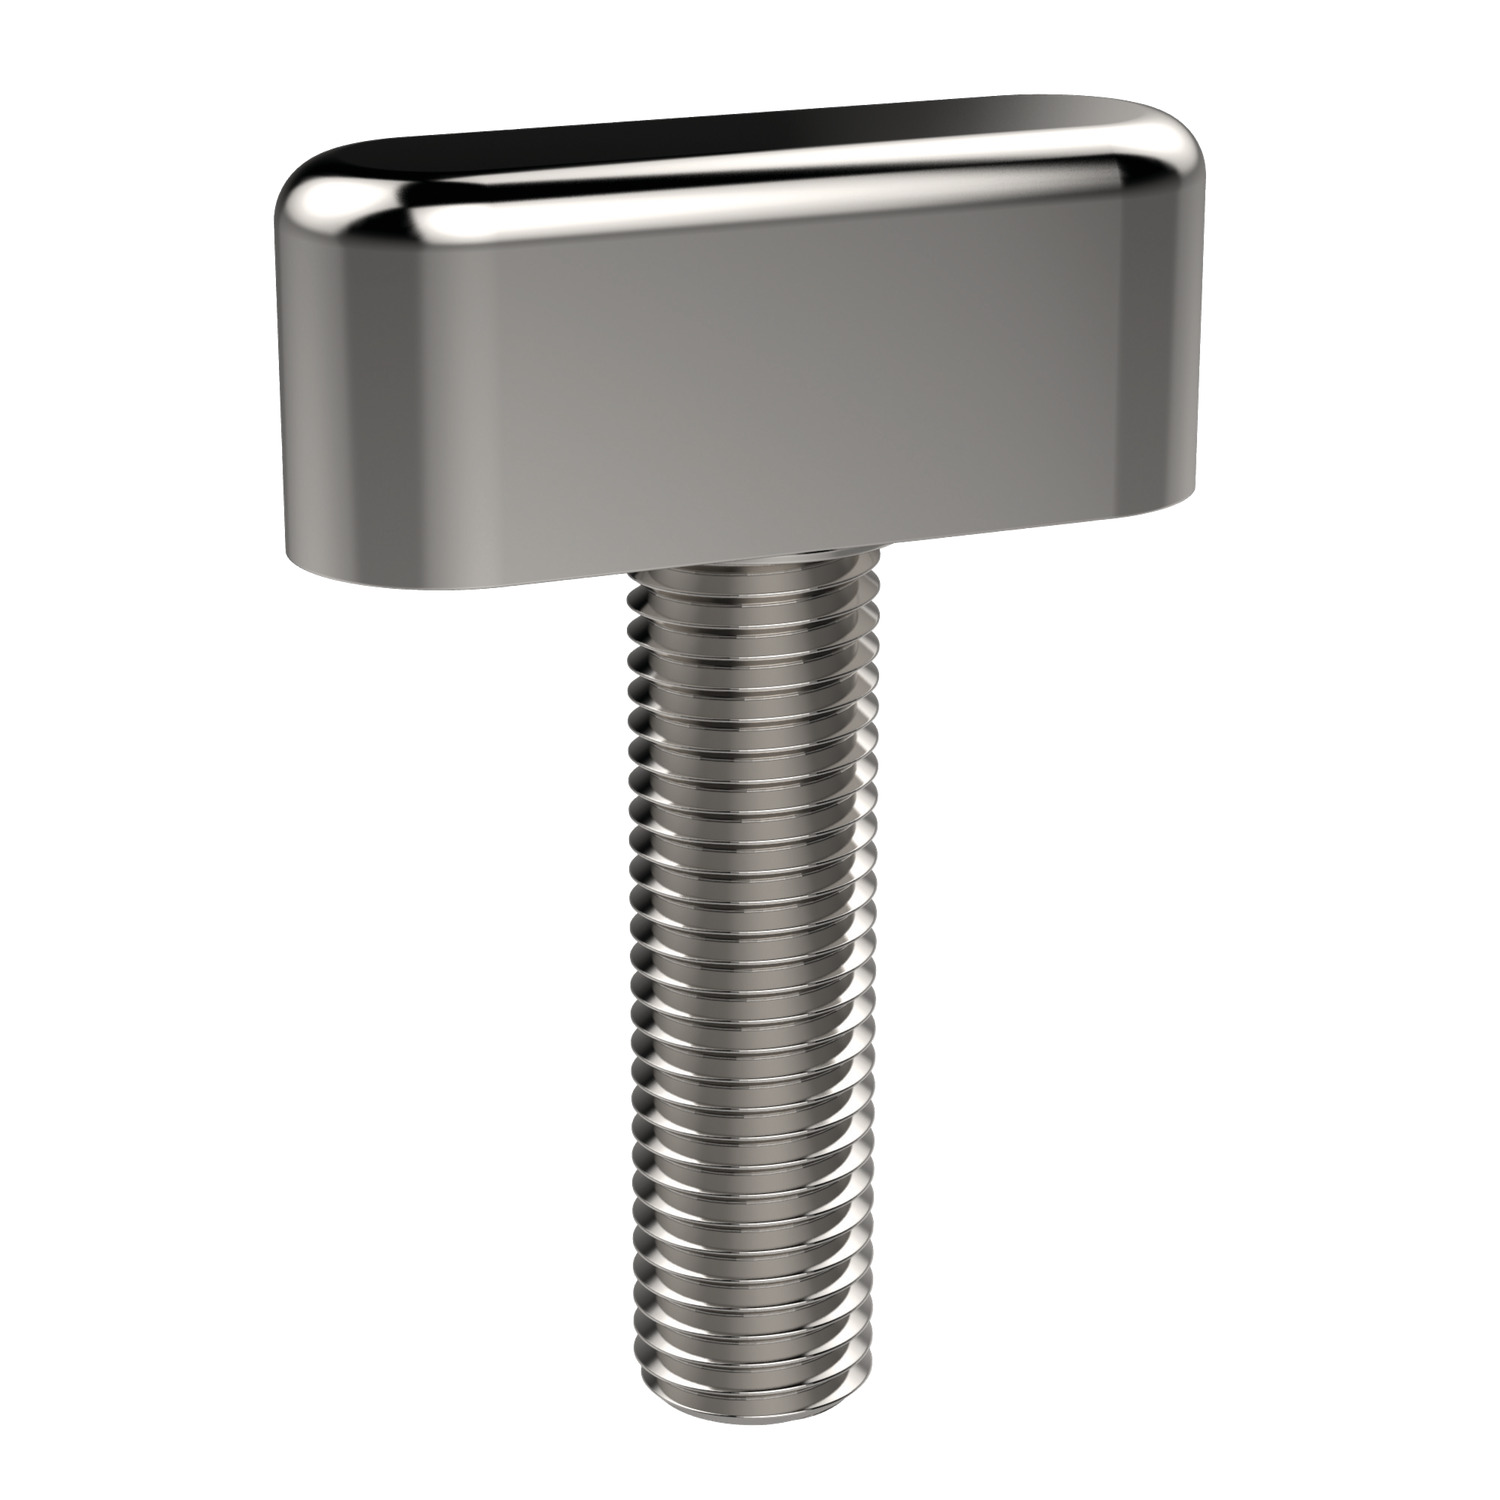 Quarter Turn Screw, Male Stainless steel male quarter turn screws. Extra gripping surface allows higher clamping torques to be applied compared to knurled handles.